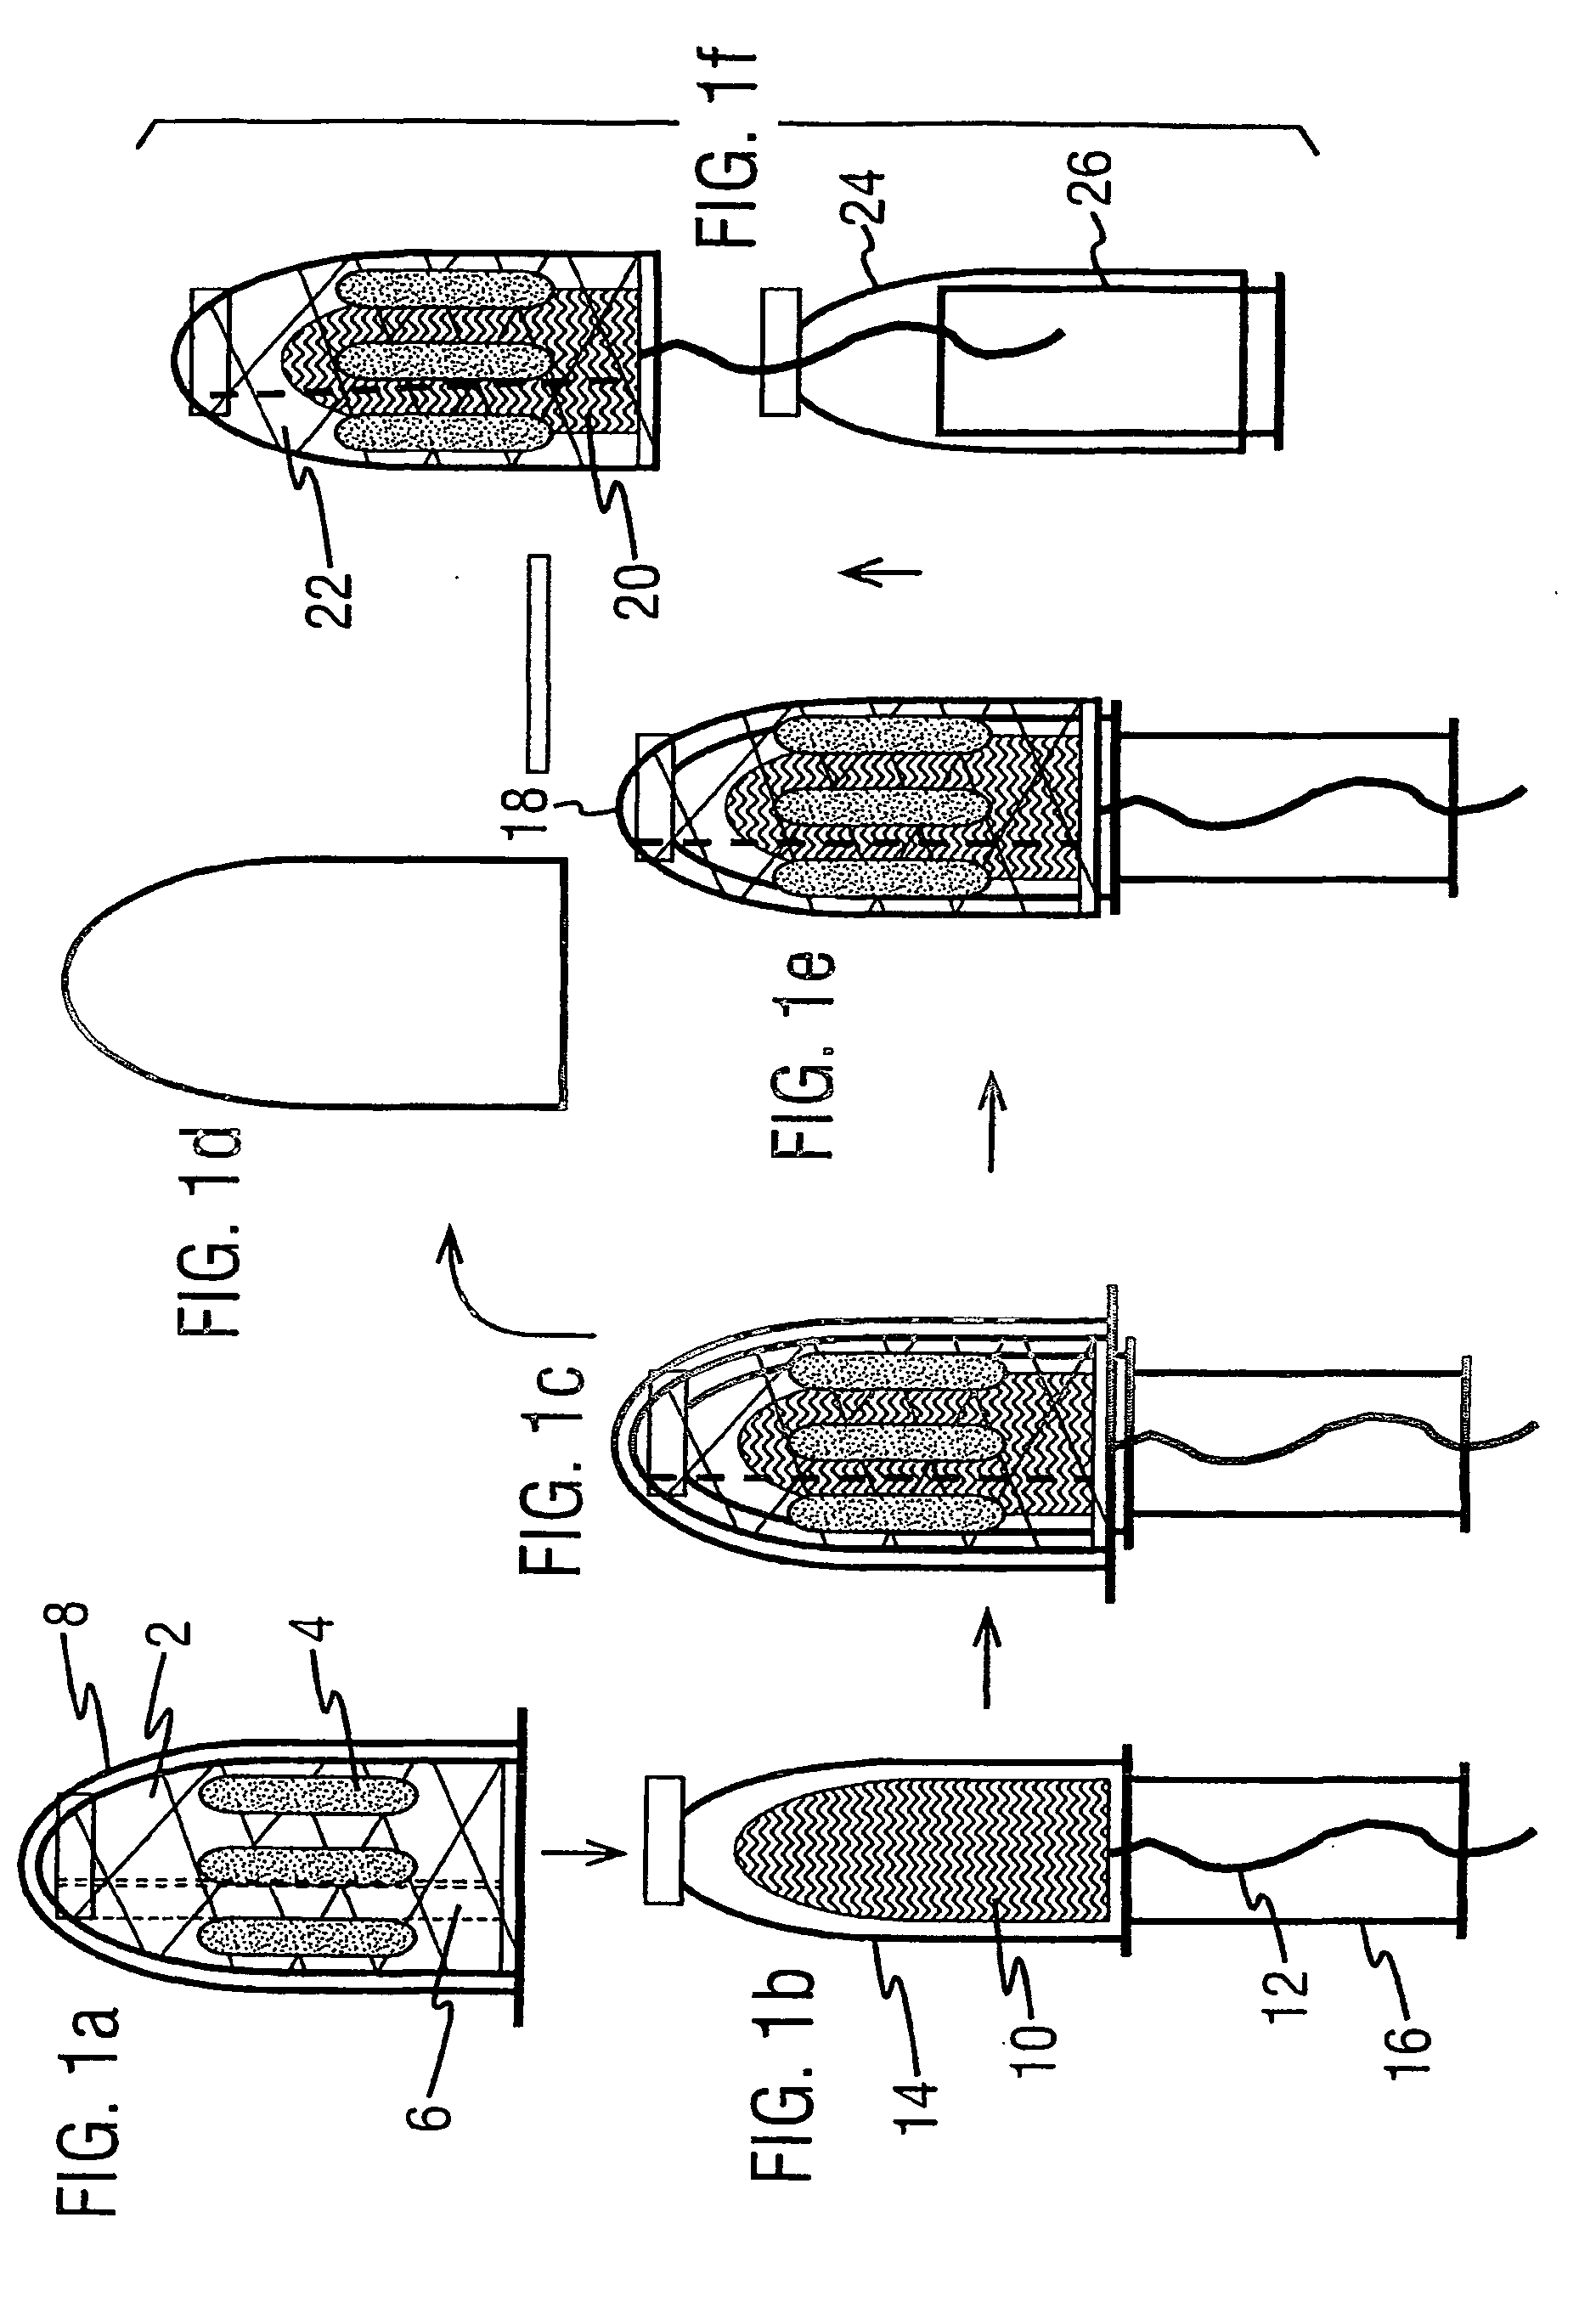 Drug delivery device comprising a mesh sleeve